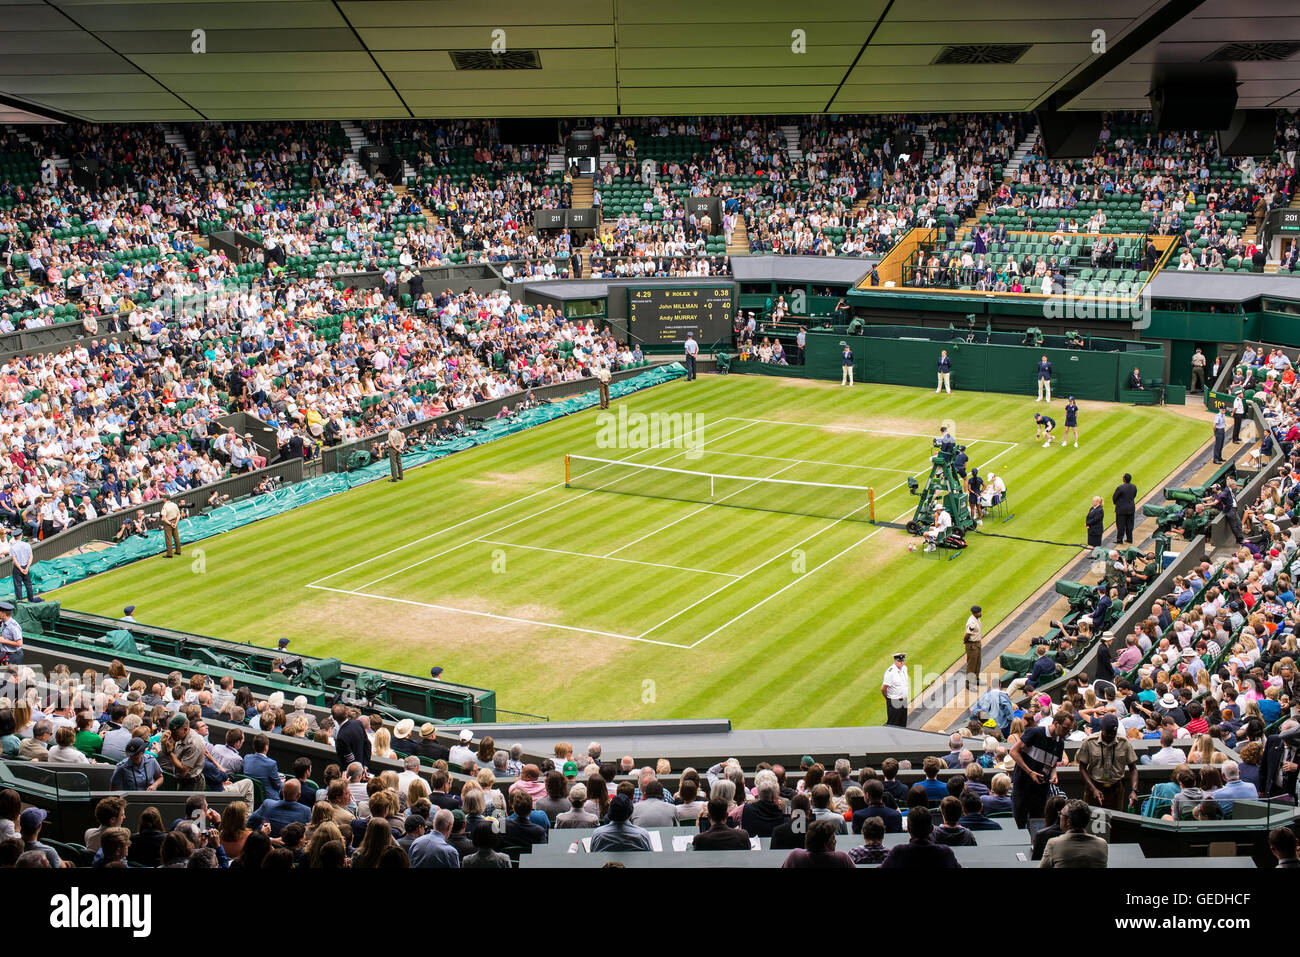 View of Centre Court full of spectators watching a game at Wimbledon All England Lawn Tennis Club Championships. Wimbledon. Stock Photo